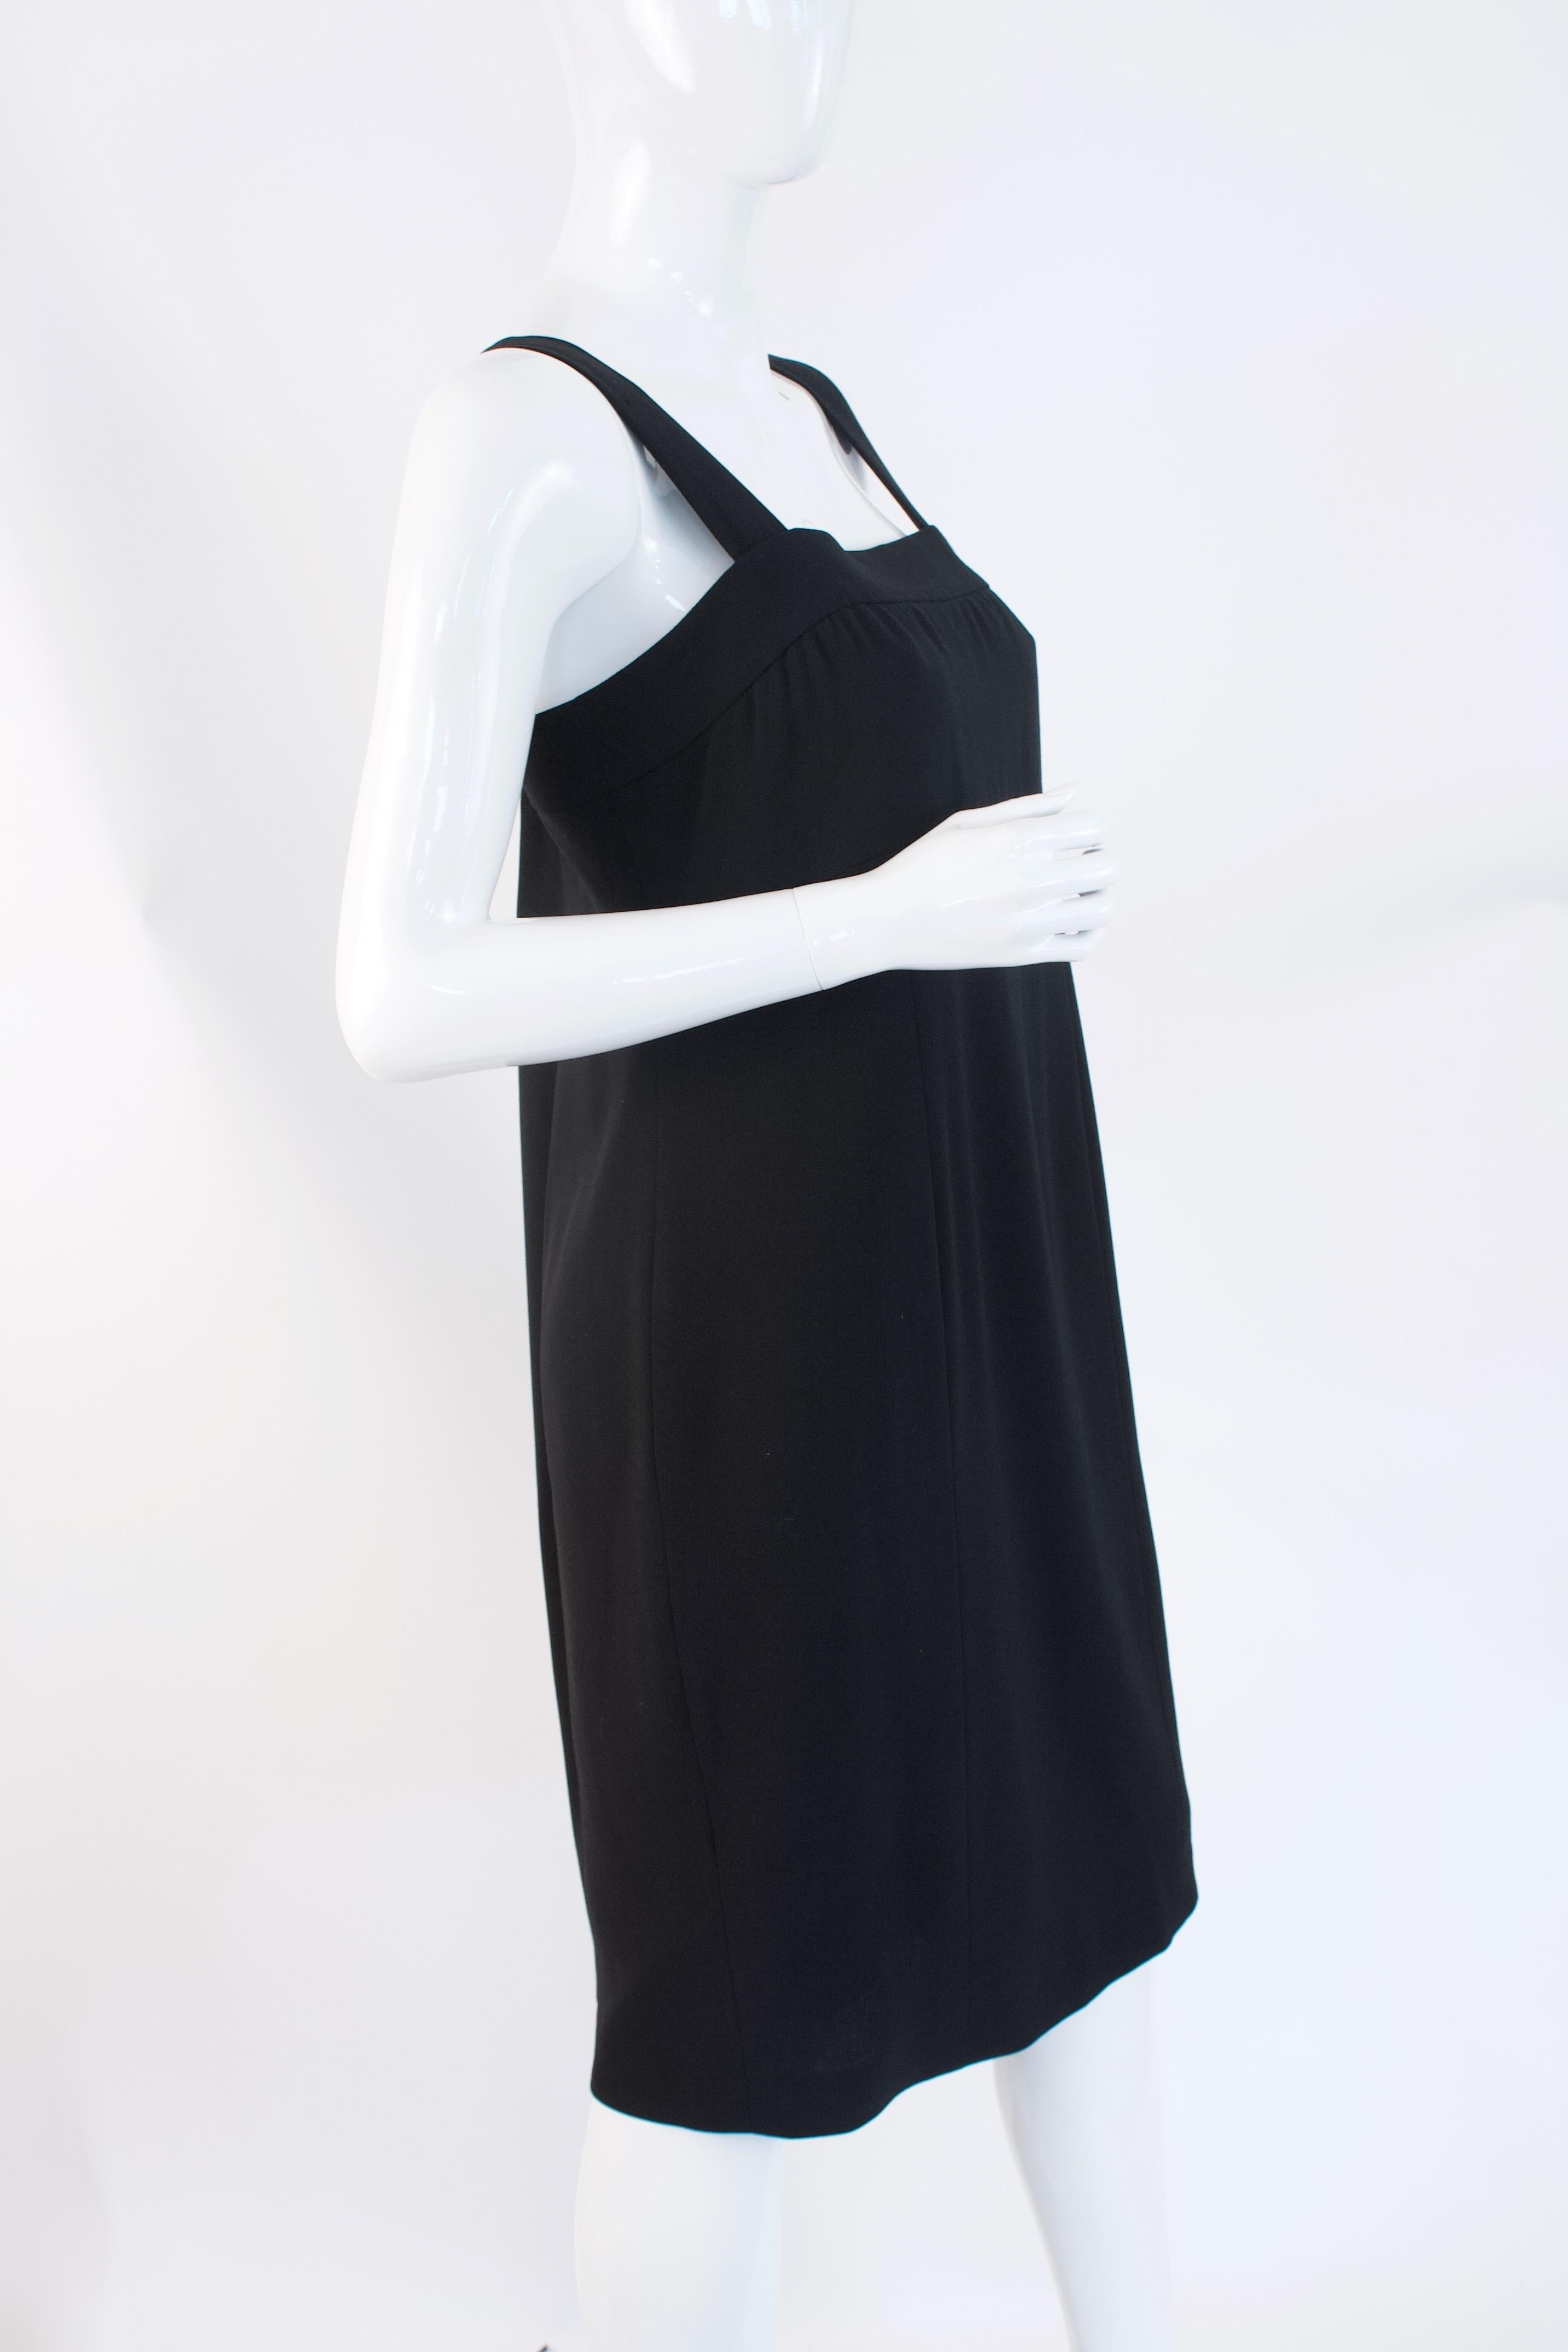 Vintage CHANEL Spring 1998 Little Black Dress.  This classic piece is made from light weight wool and lined in silk.  Two logo buttons adorn the back. 
 
Designer: Chanel


Condition: Excellent, light wear

Size:  44, fits like a medium

Length: 34